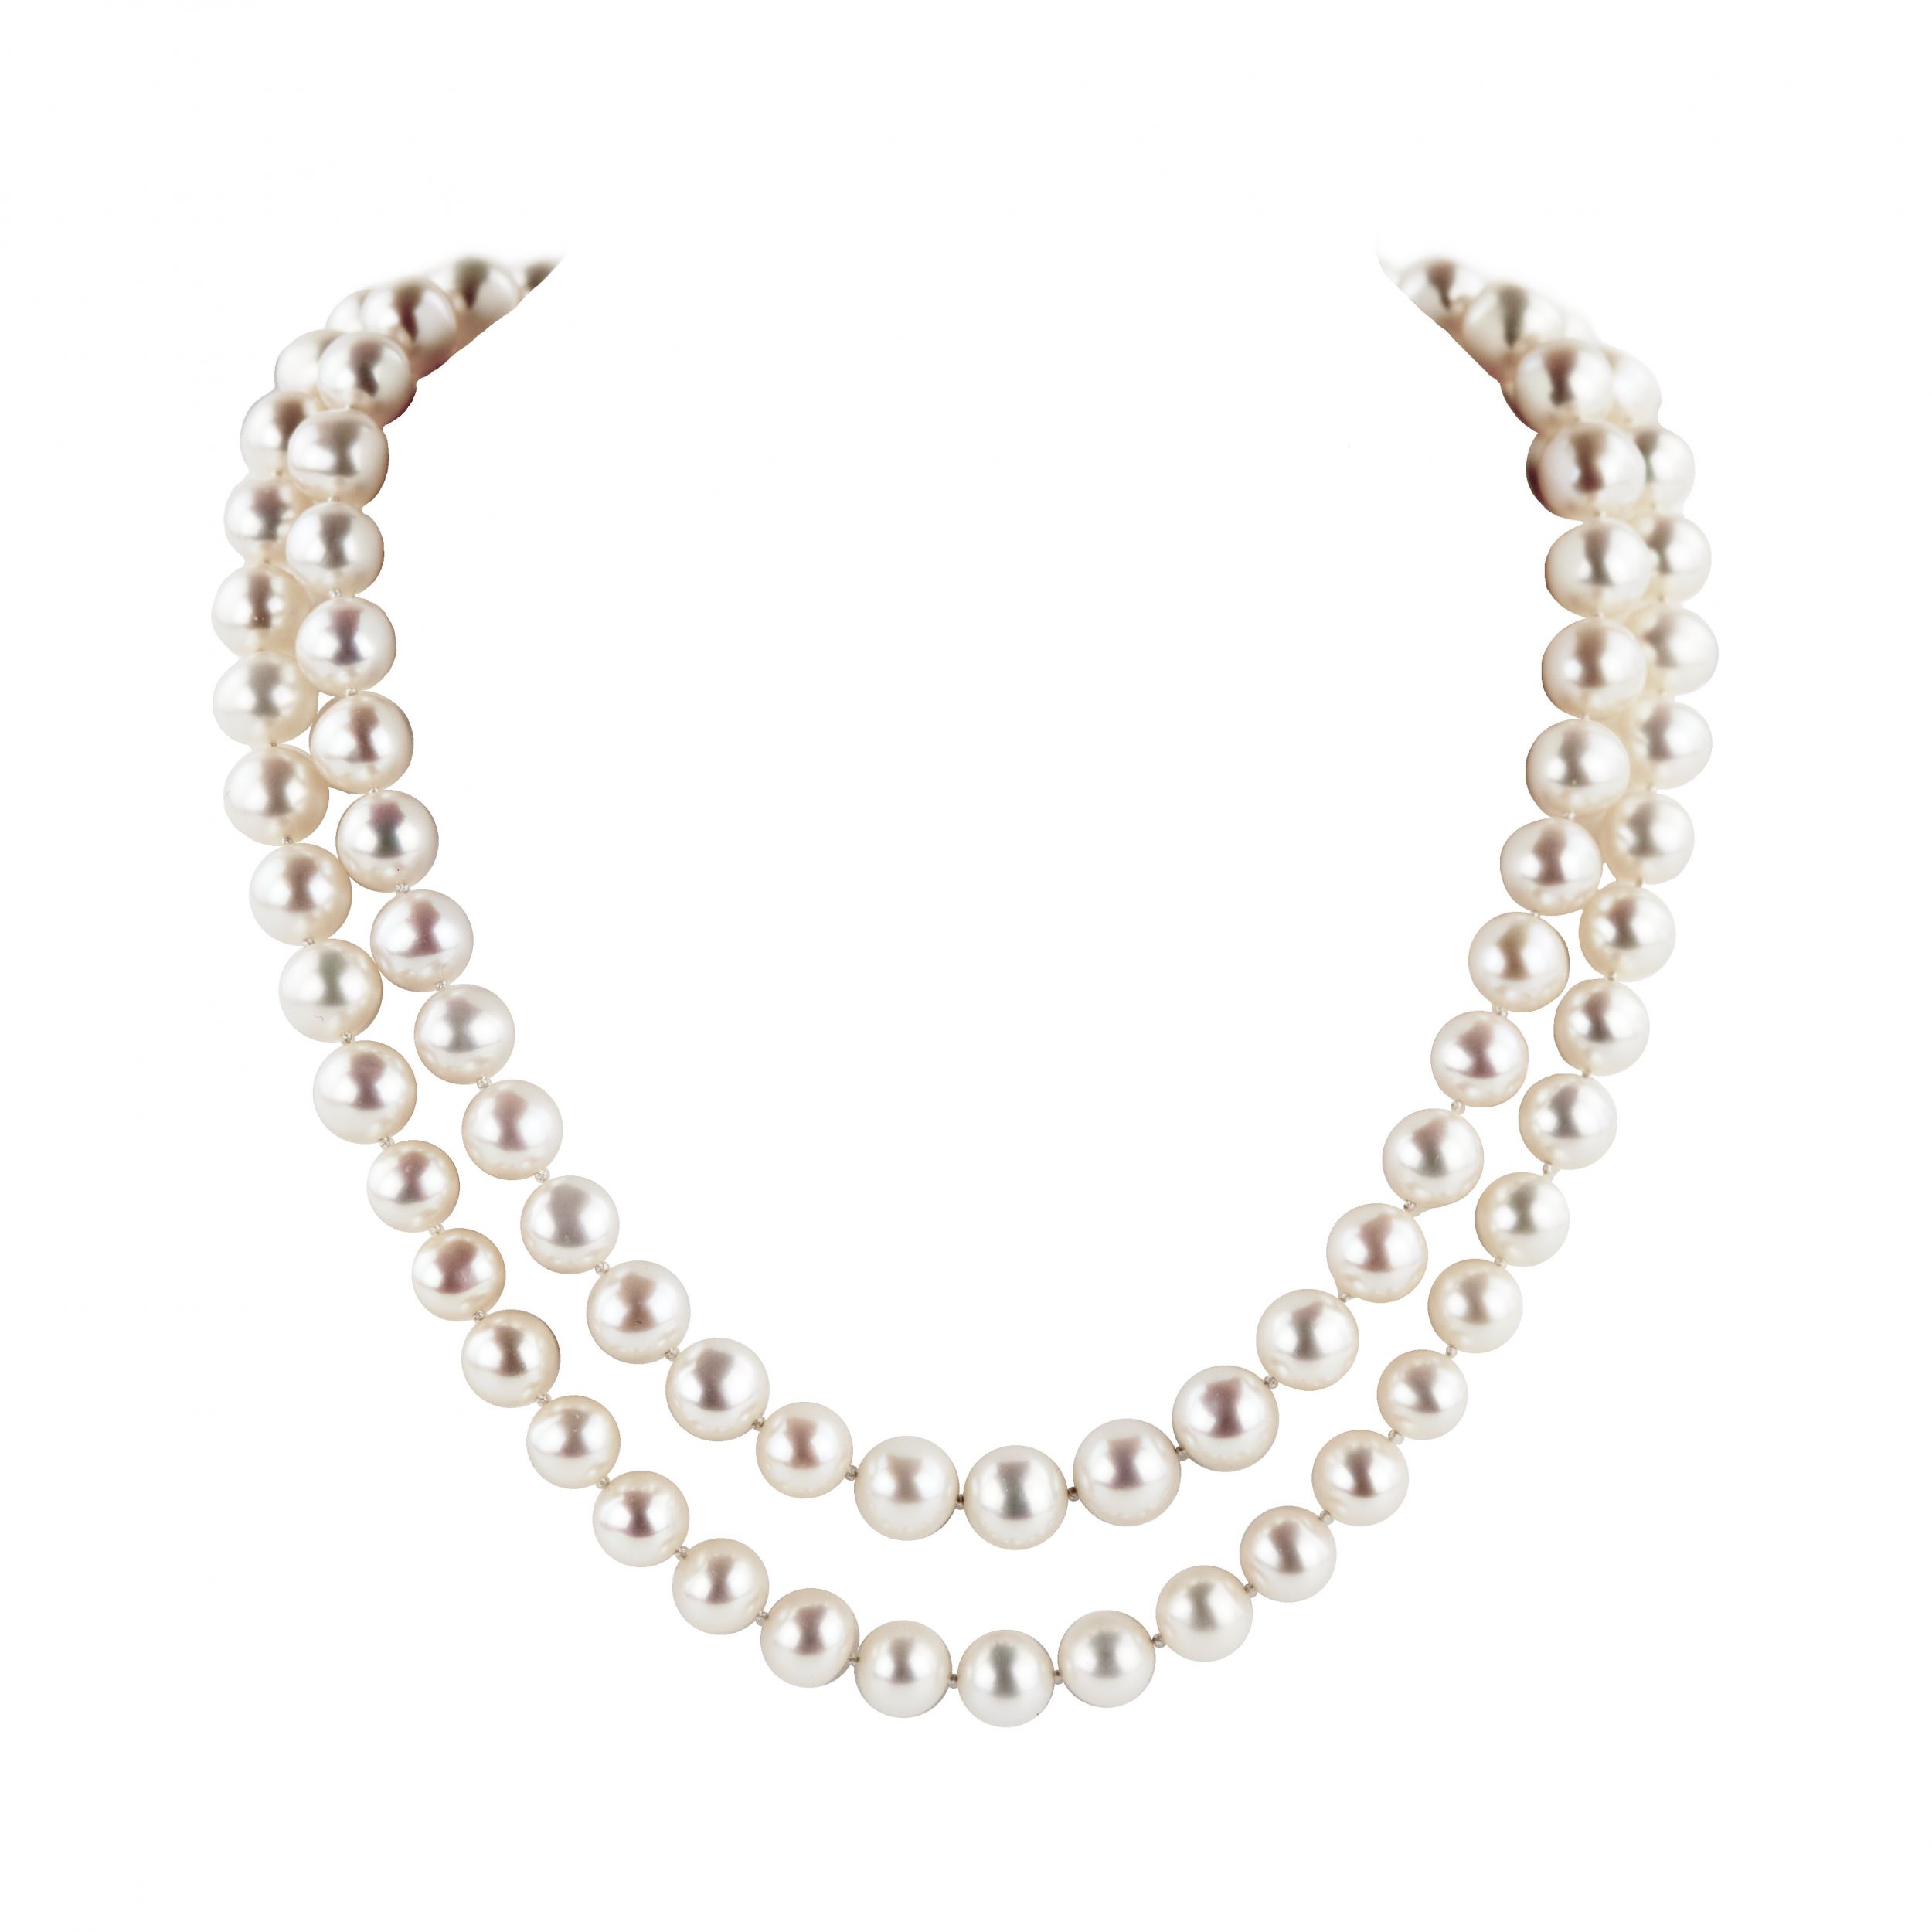 Heavy-necklace-made-of-selected-pearls-Burma-